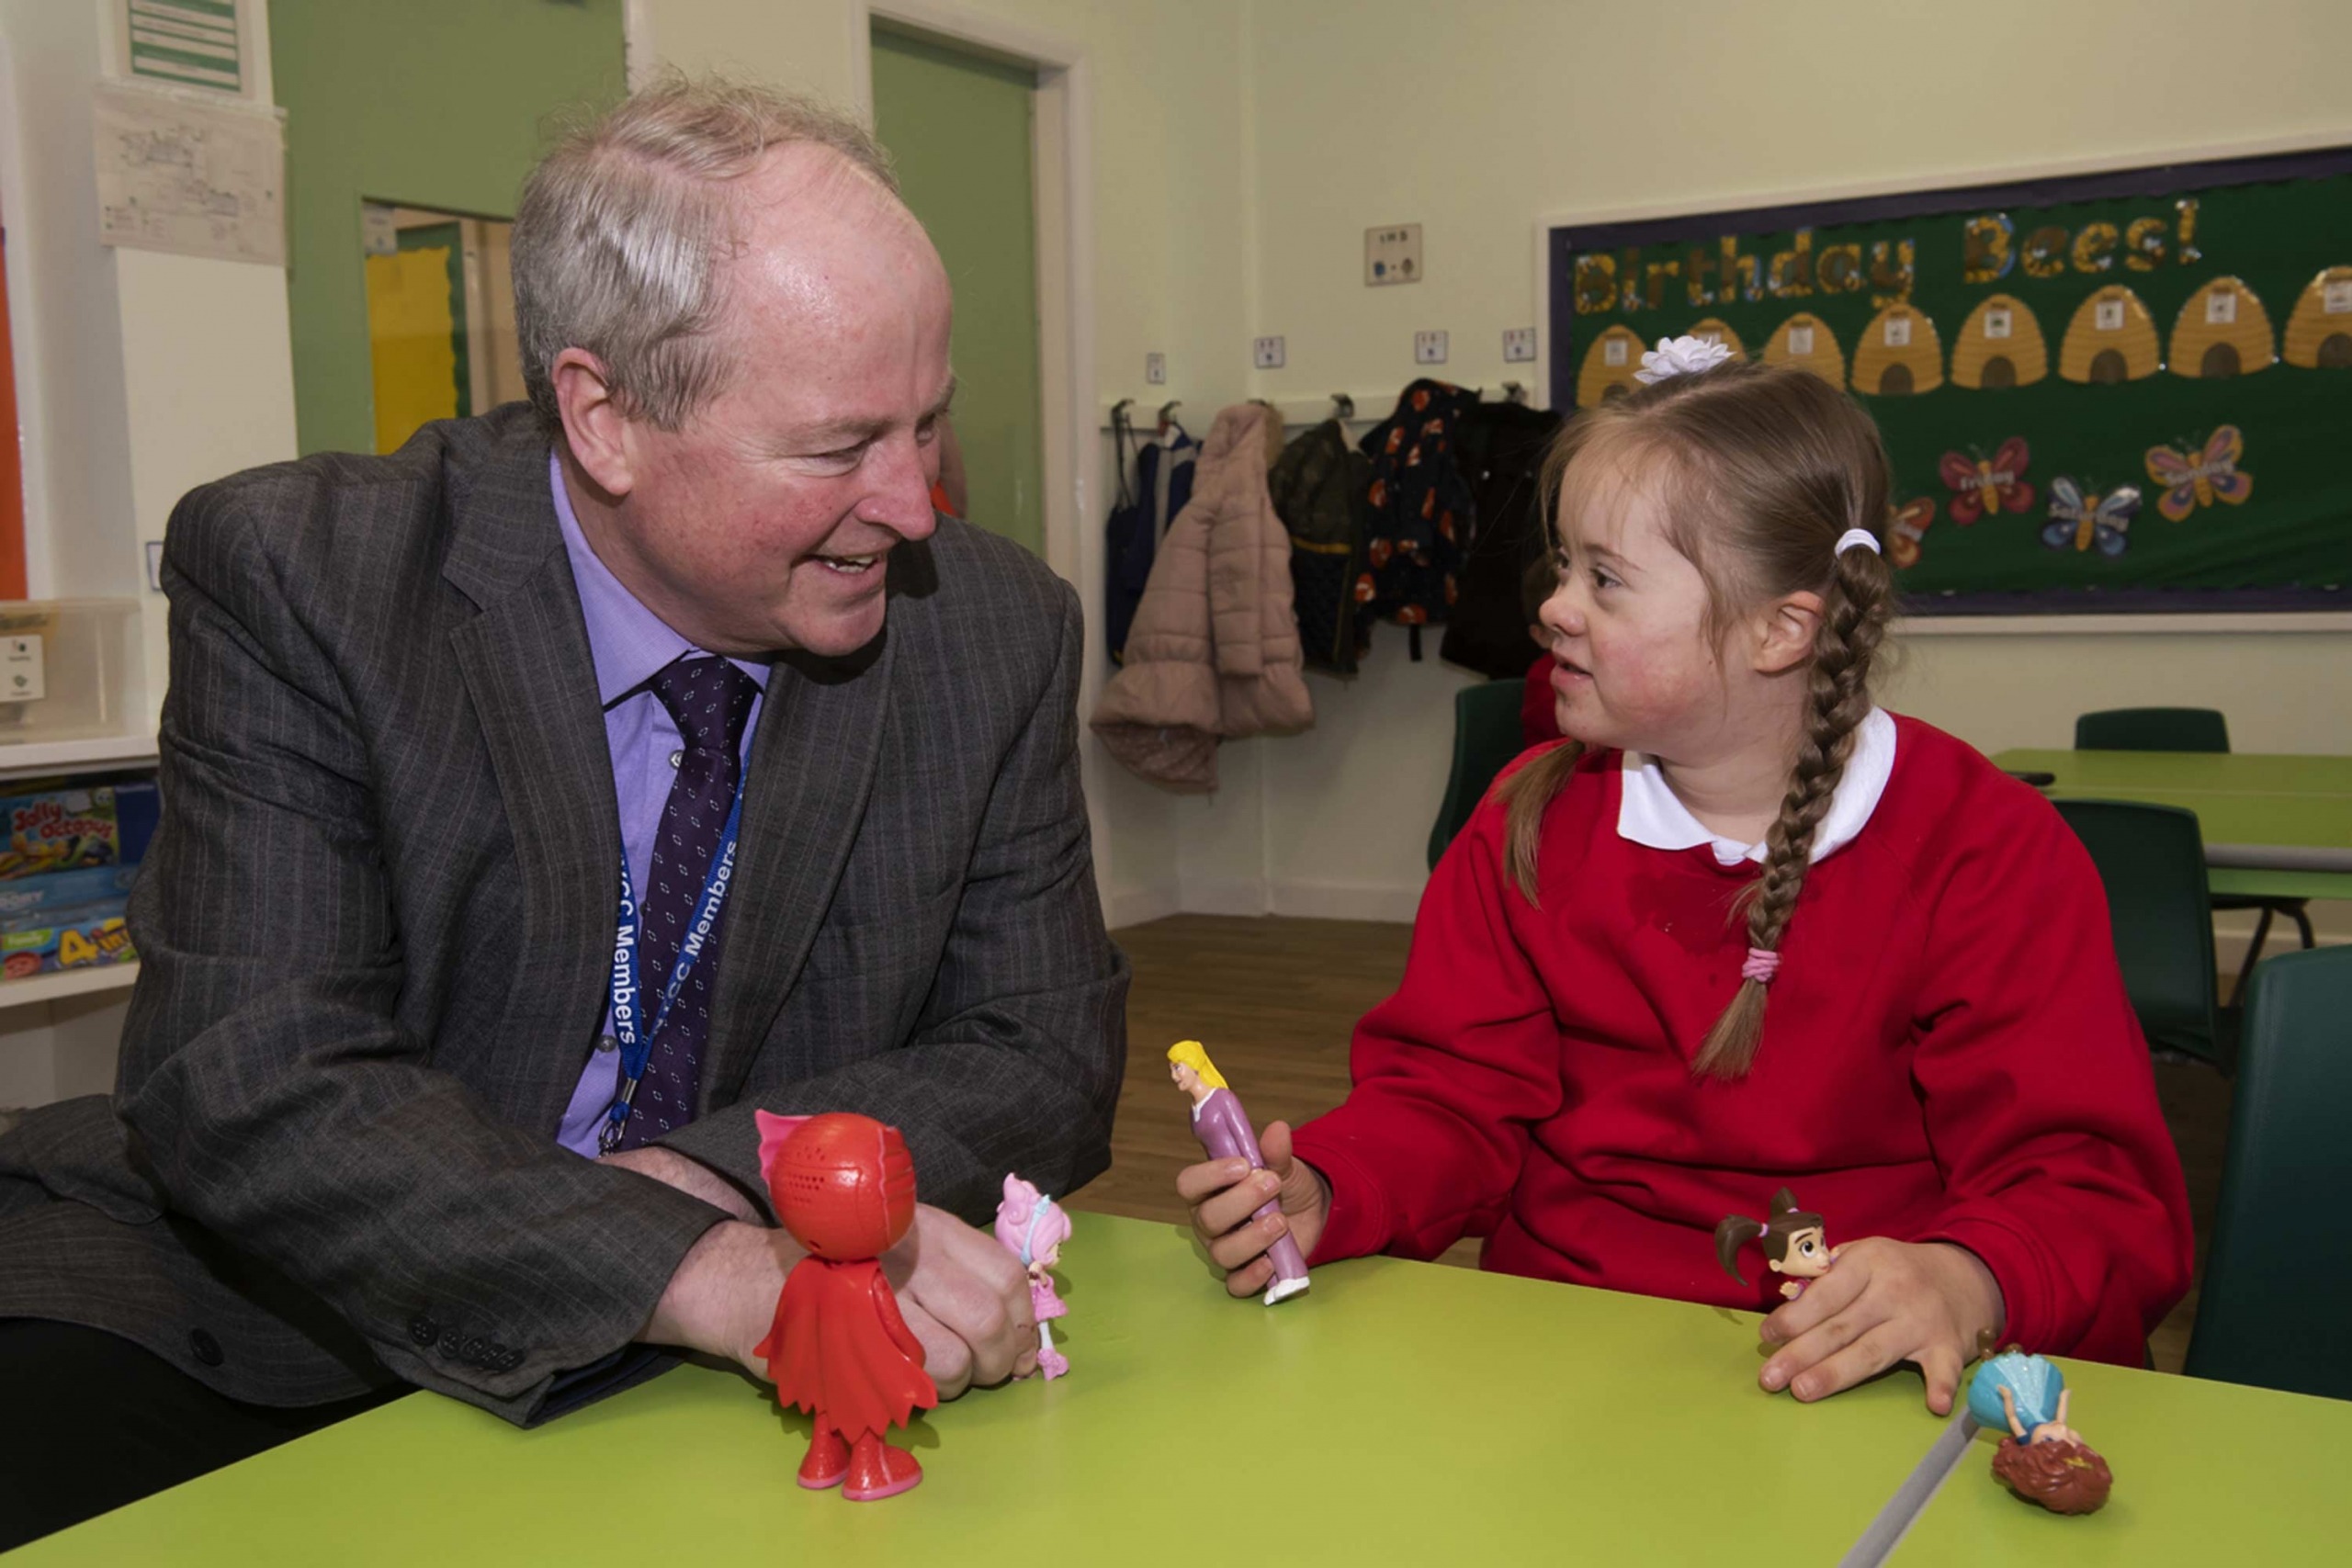 Cllr Patrick Mulligan with seven-year-old Molly Pottage in the new Ripon satellite site of Mowbray school